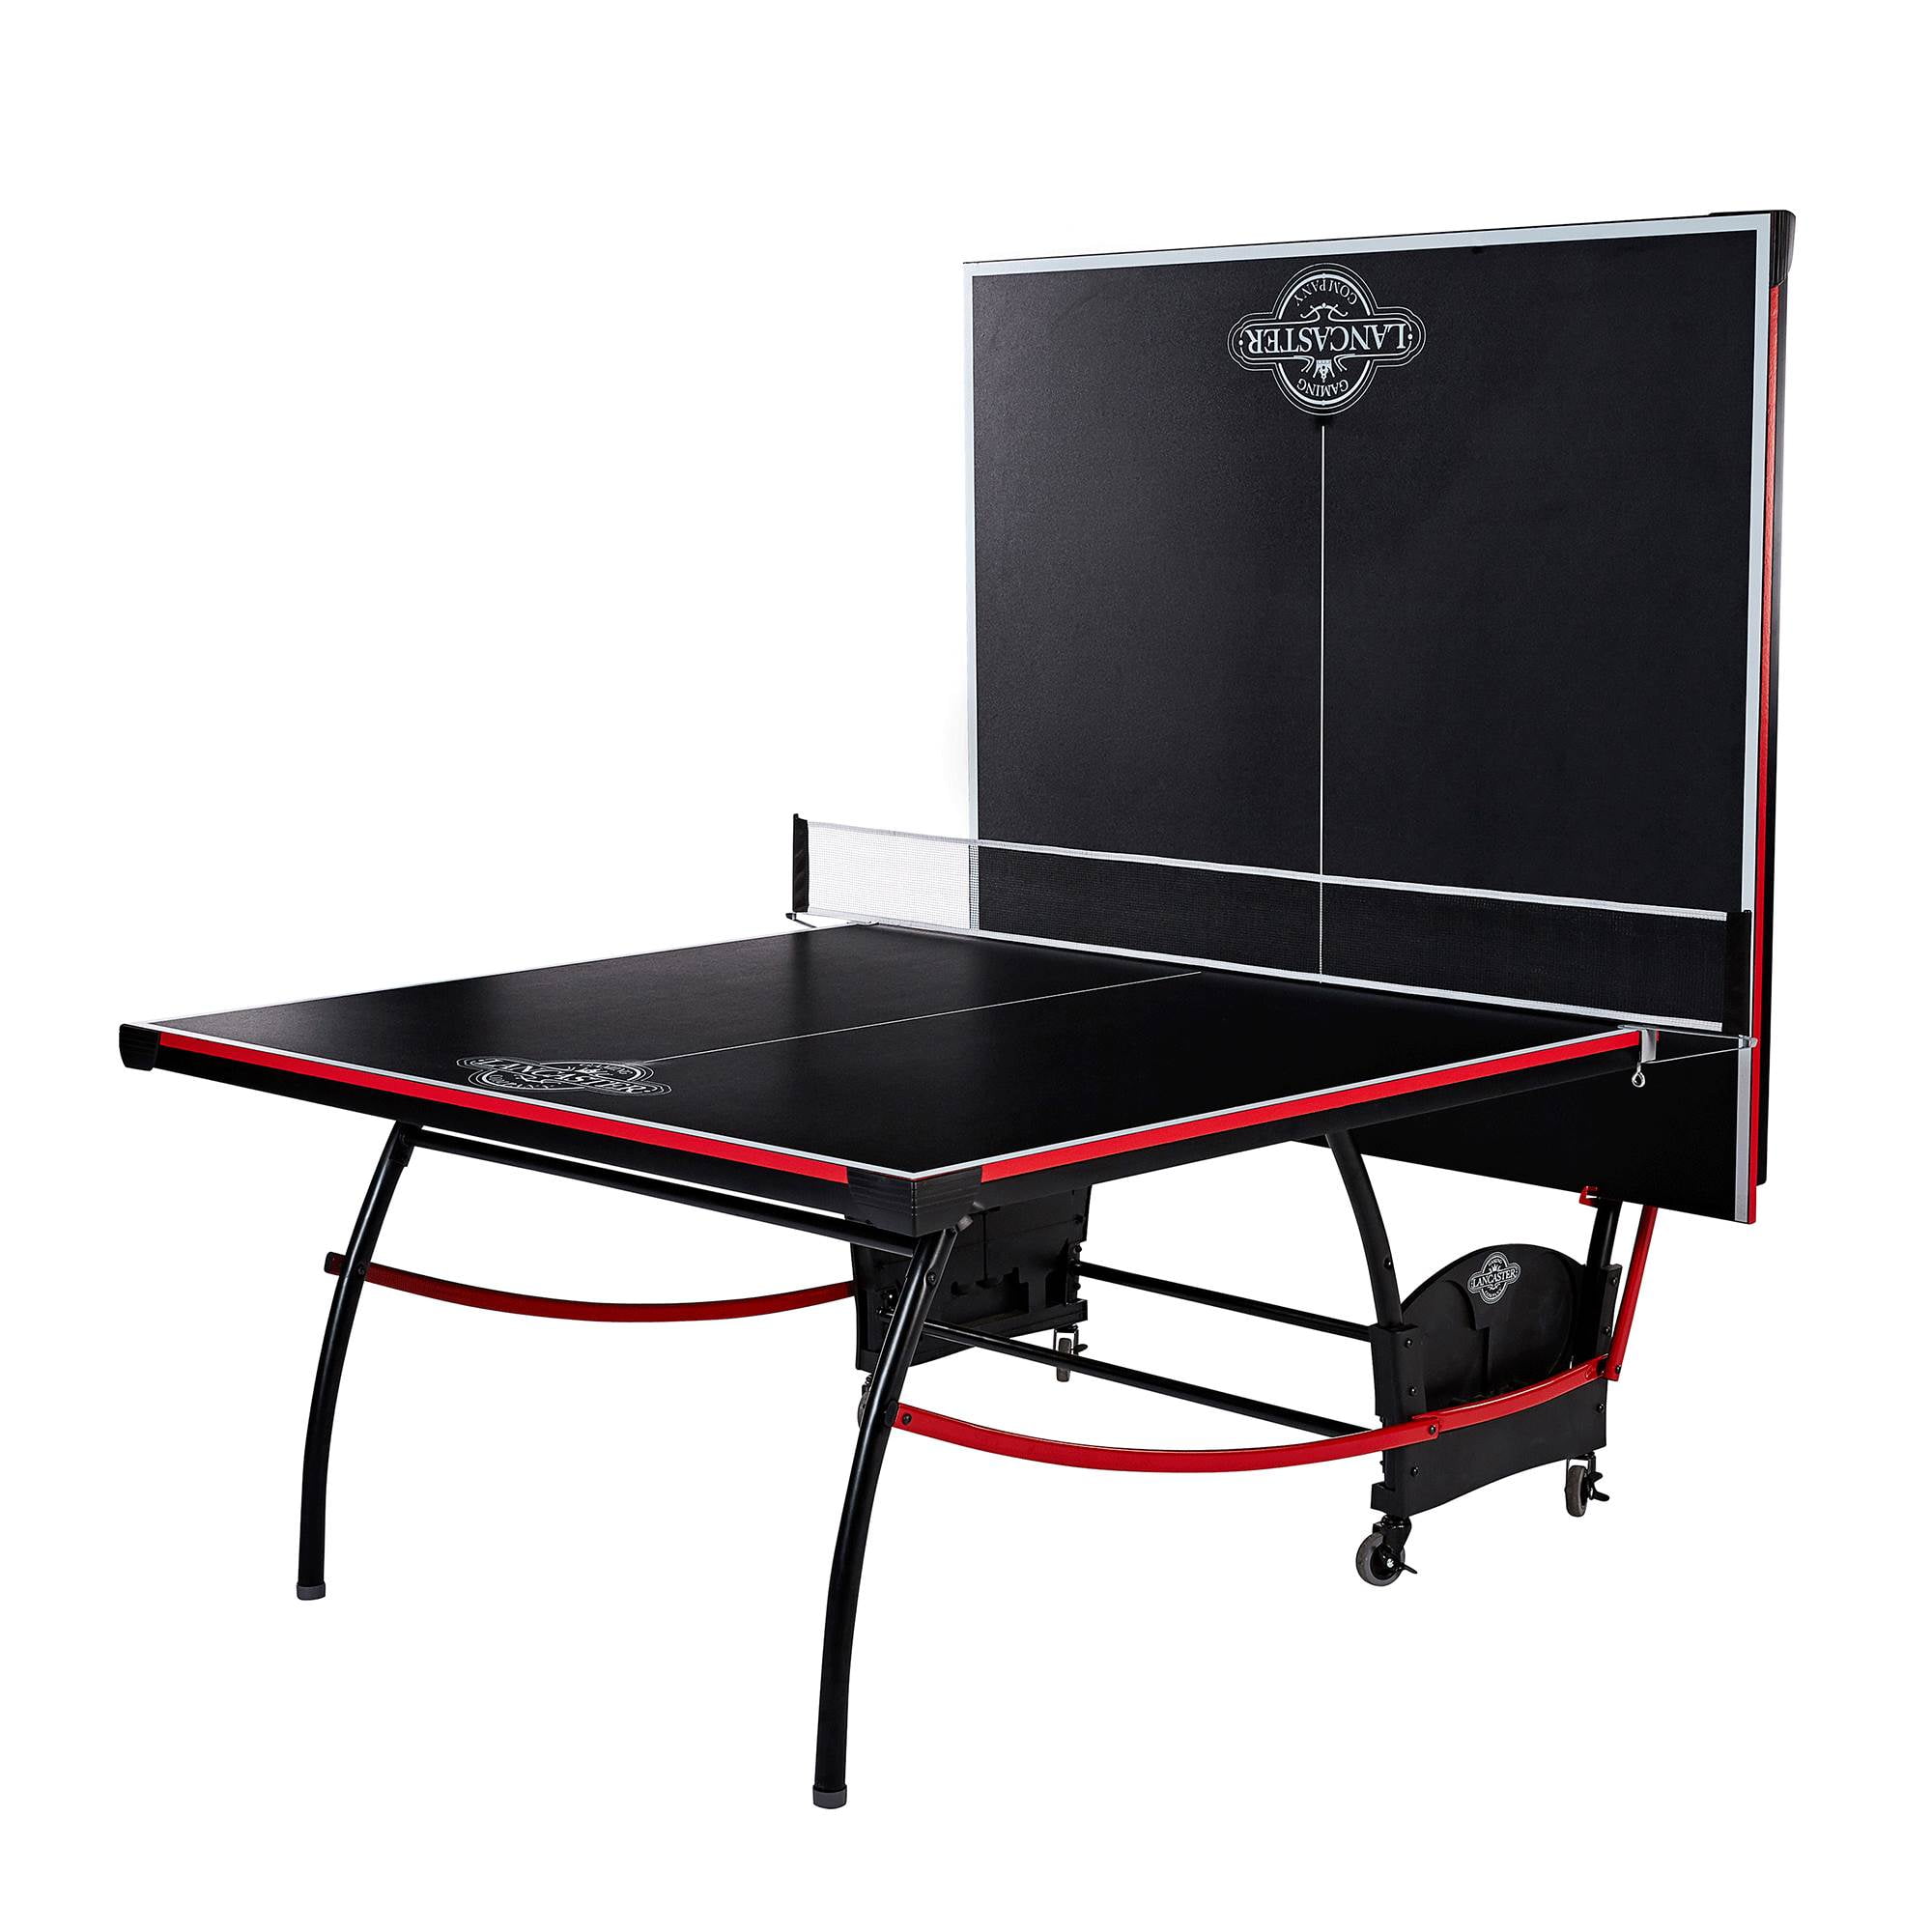 Lancaster 4 Piece Official Size Indoor Folding Table Tennis Ping Pong Game  Table 821735440110